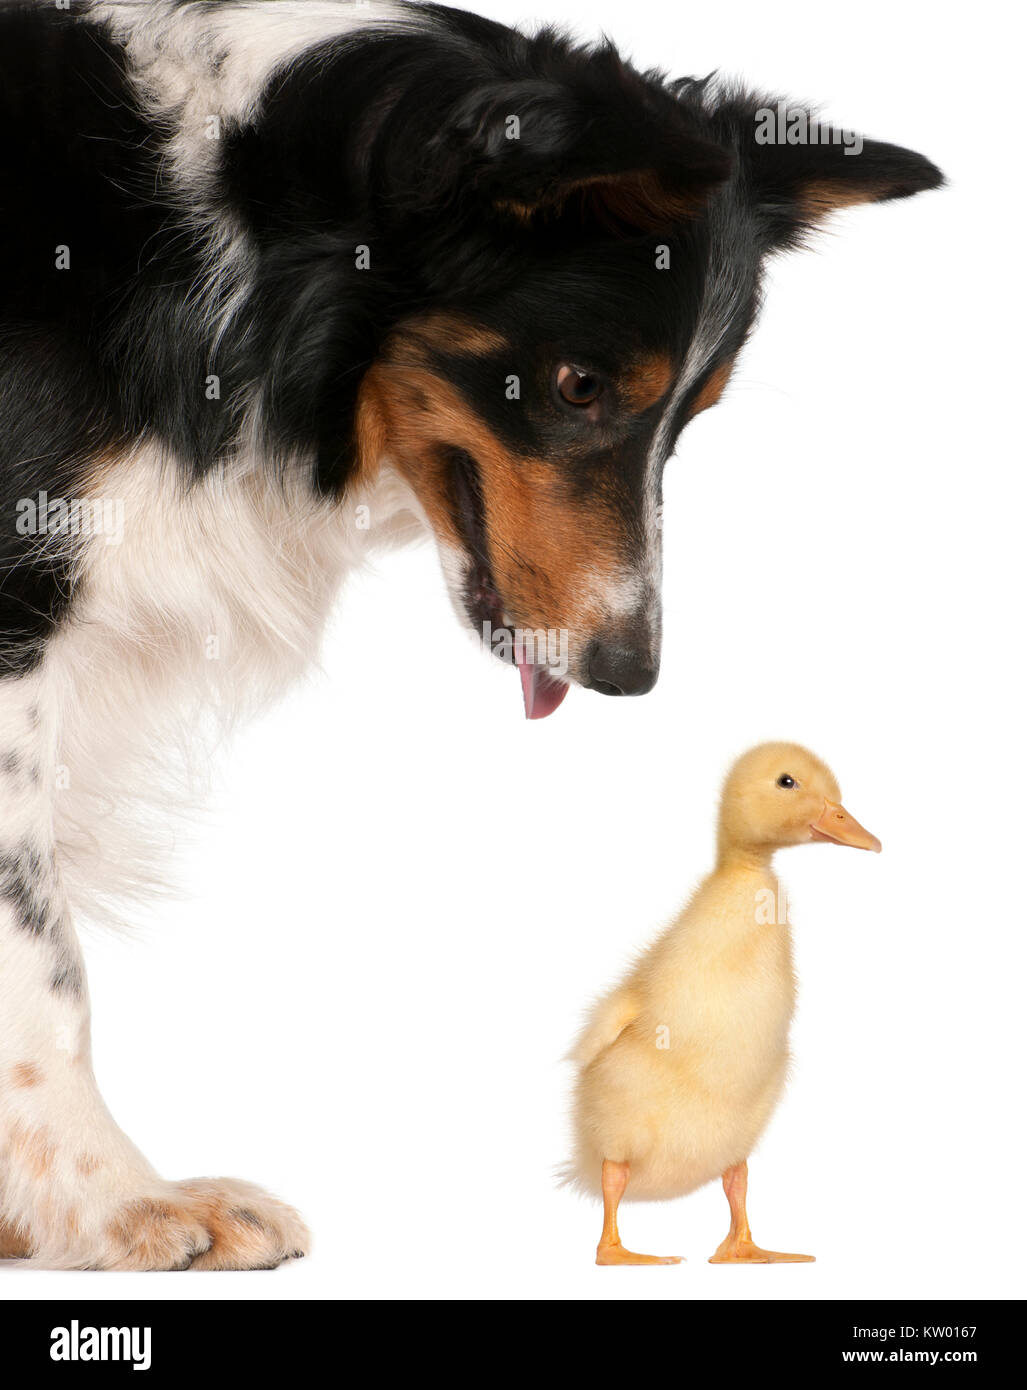 Female Border Collie, 3 years old, looking at a domestic duckling, 1 week old, in front of white background Stock Photo